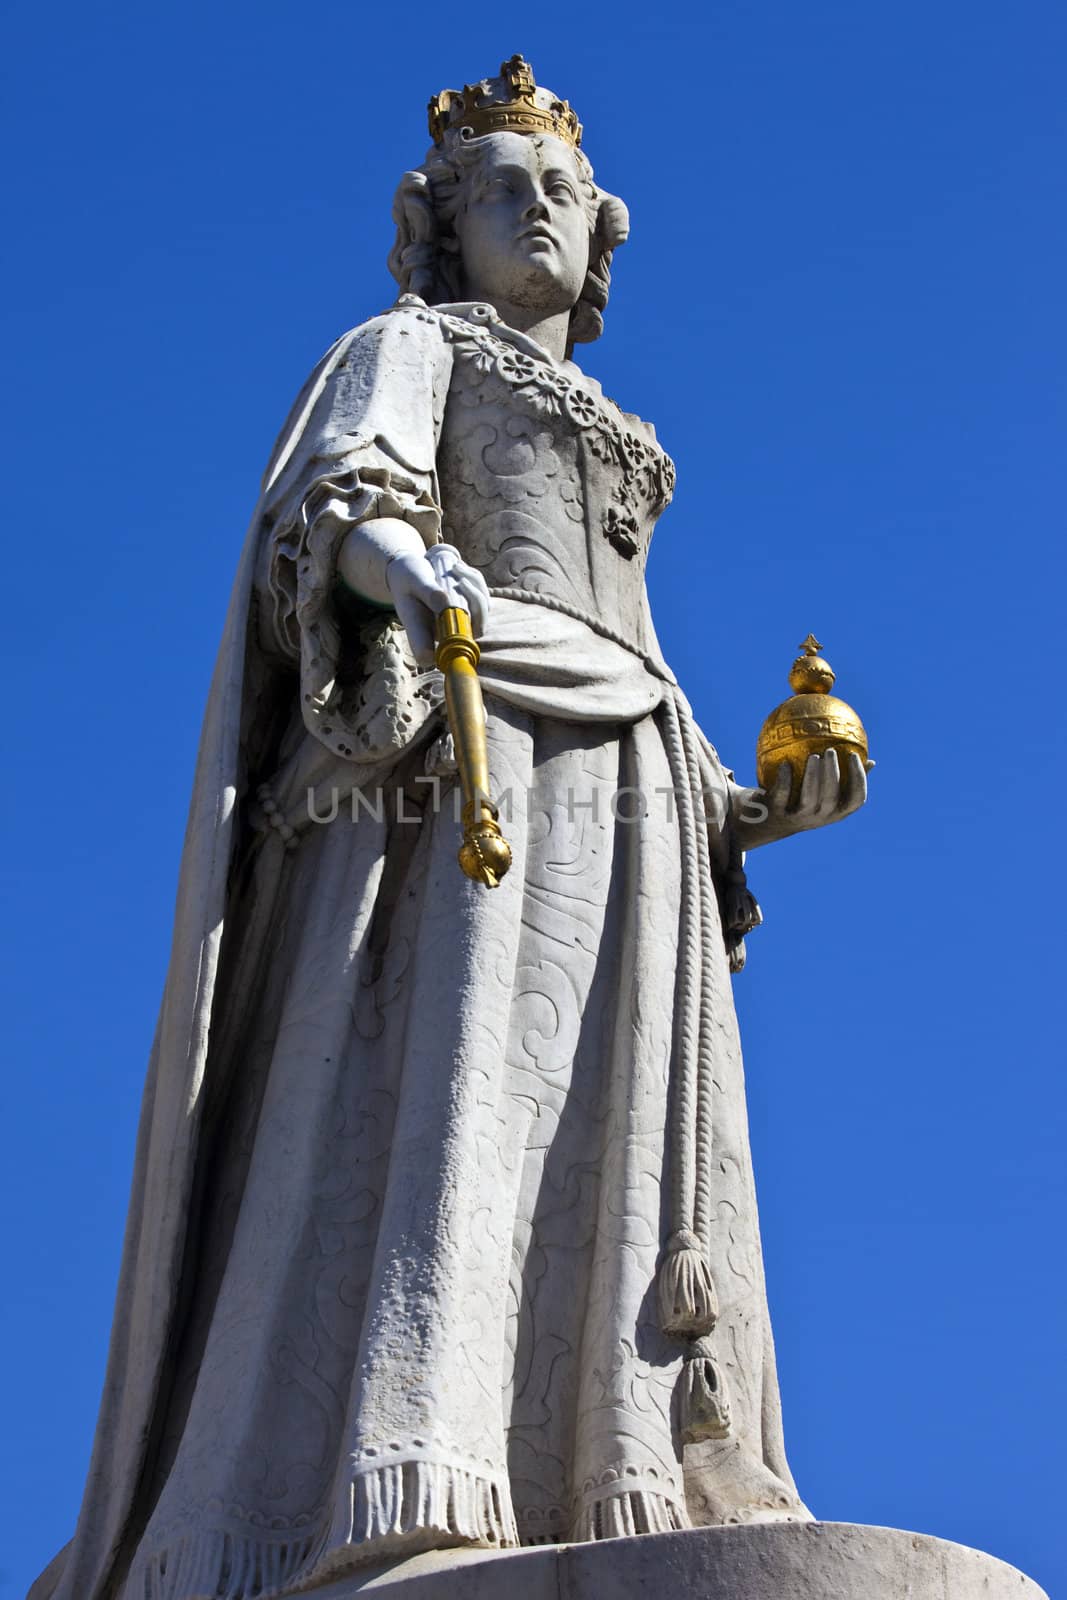 Queen Anne Statue at St. Paul's Cathedral in London by chrisdorney